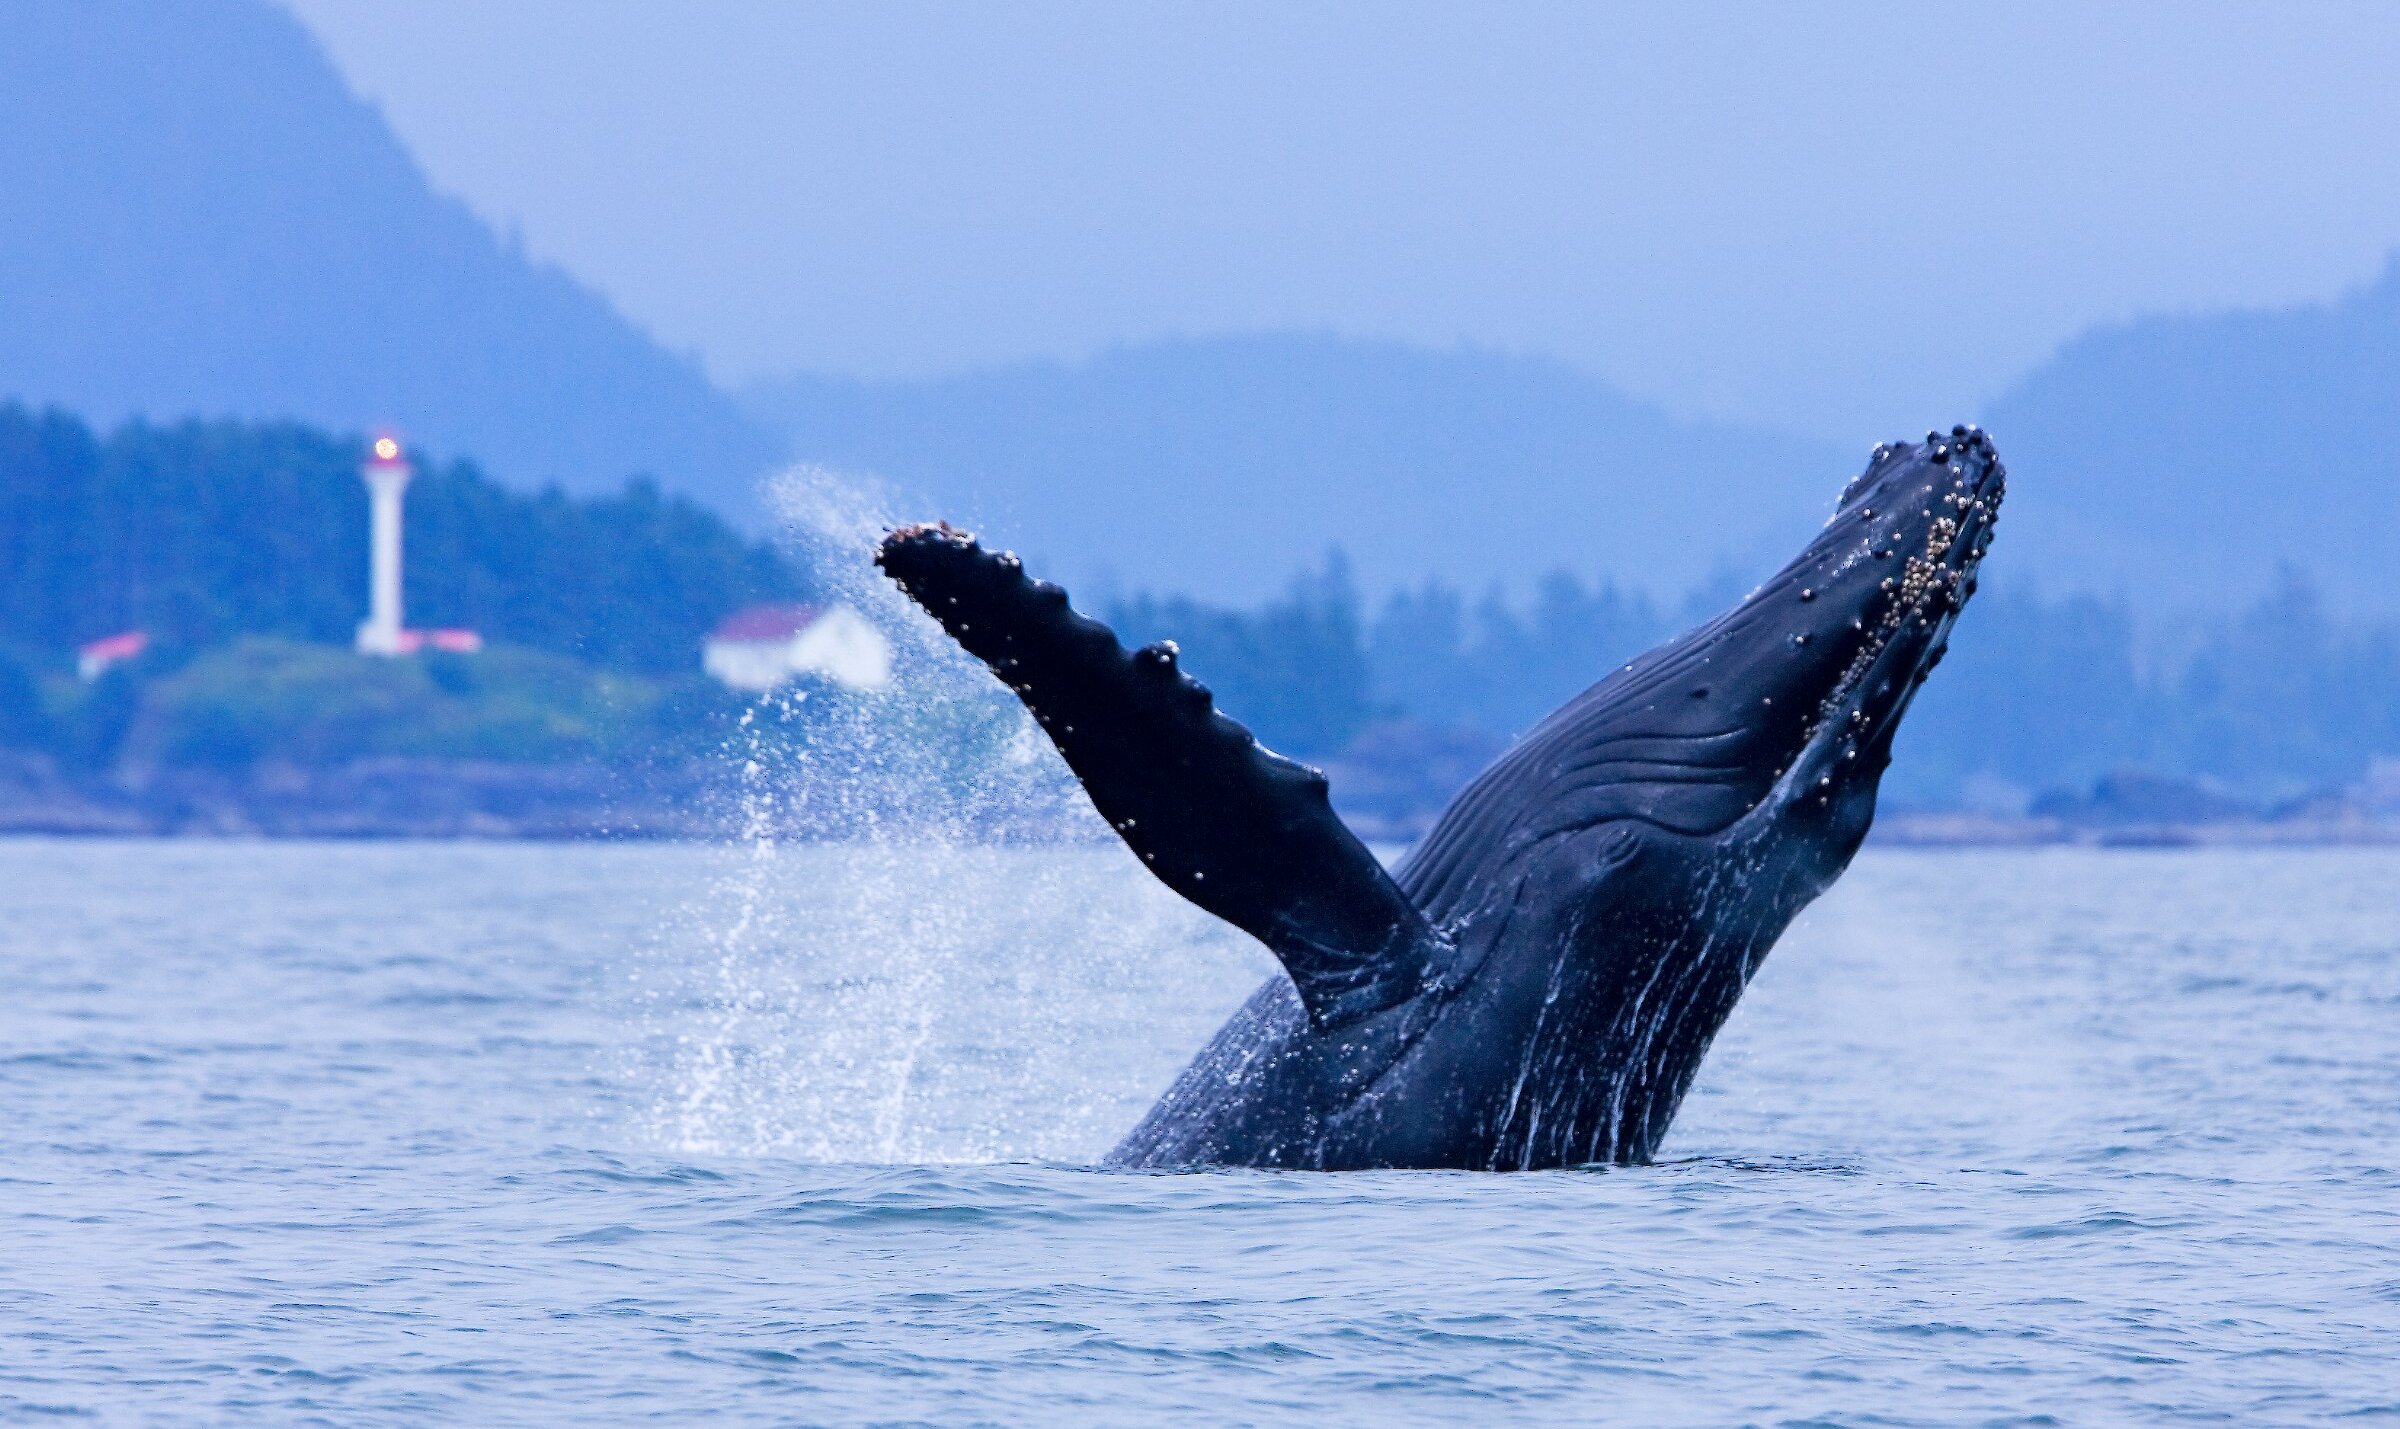 Humpback whale breeching in the water